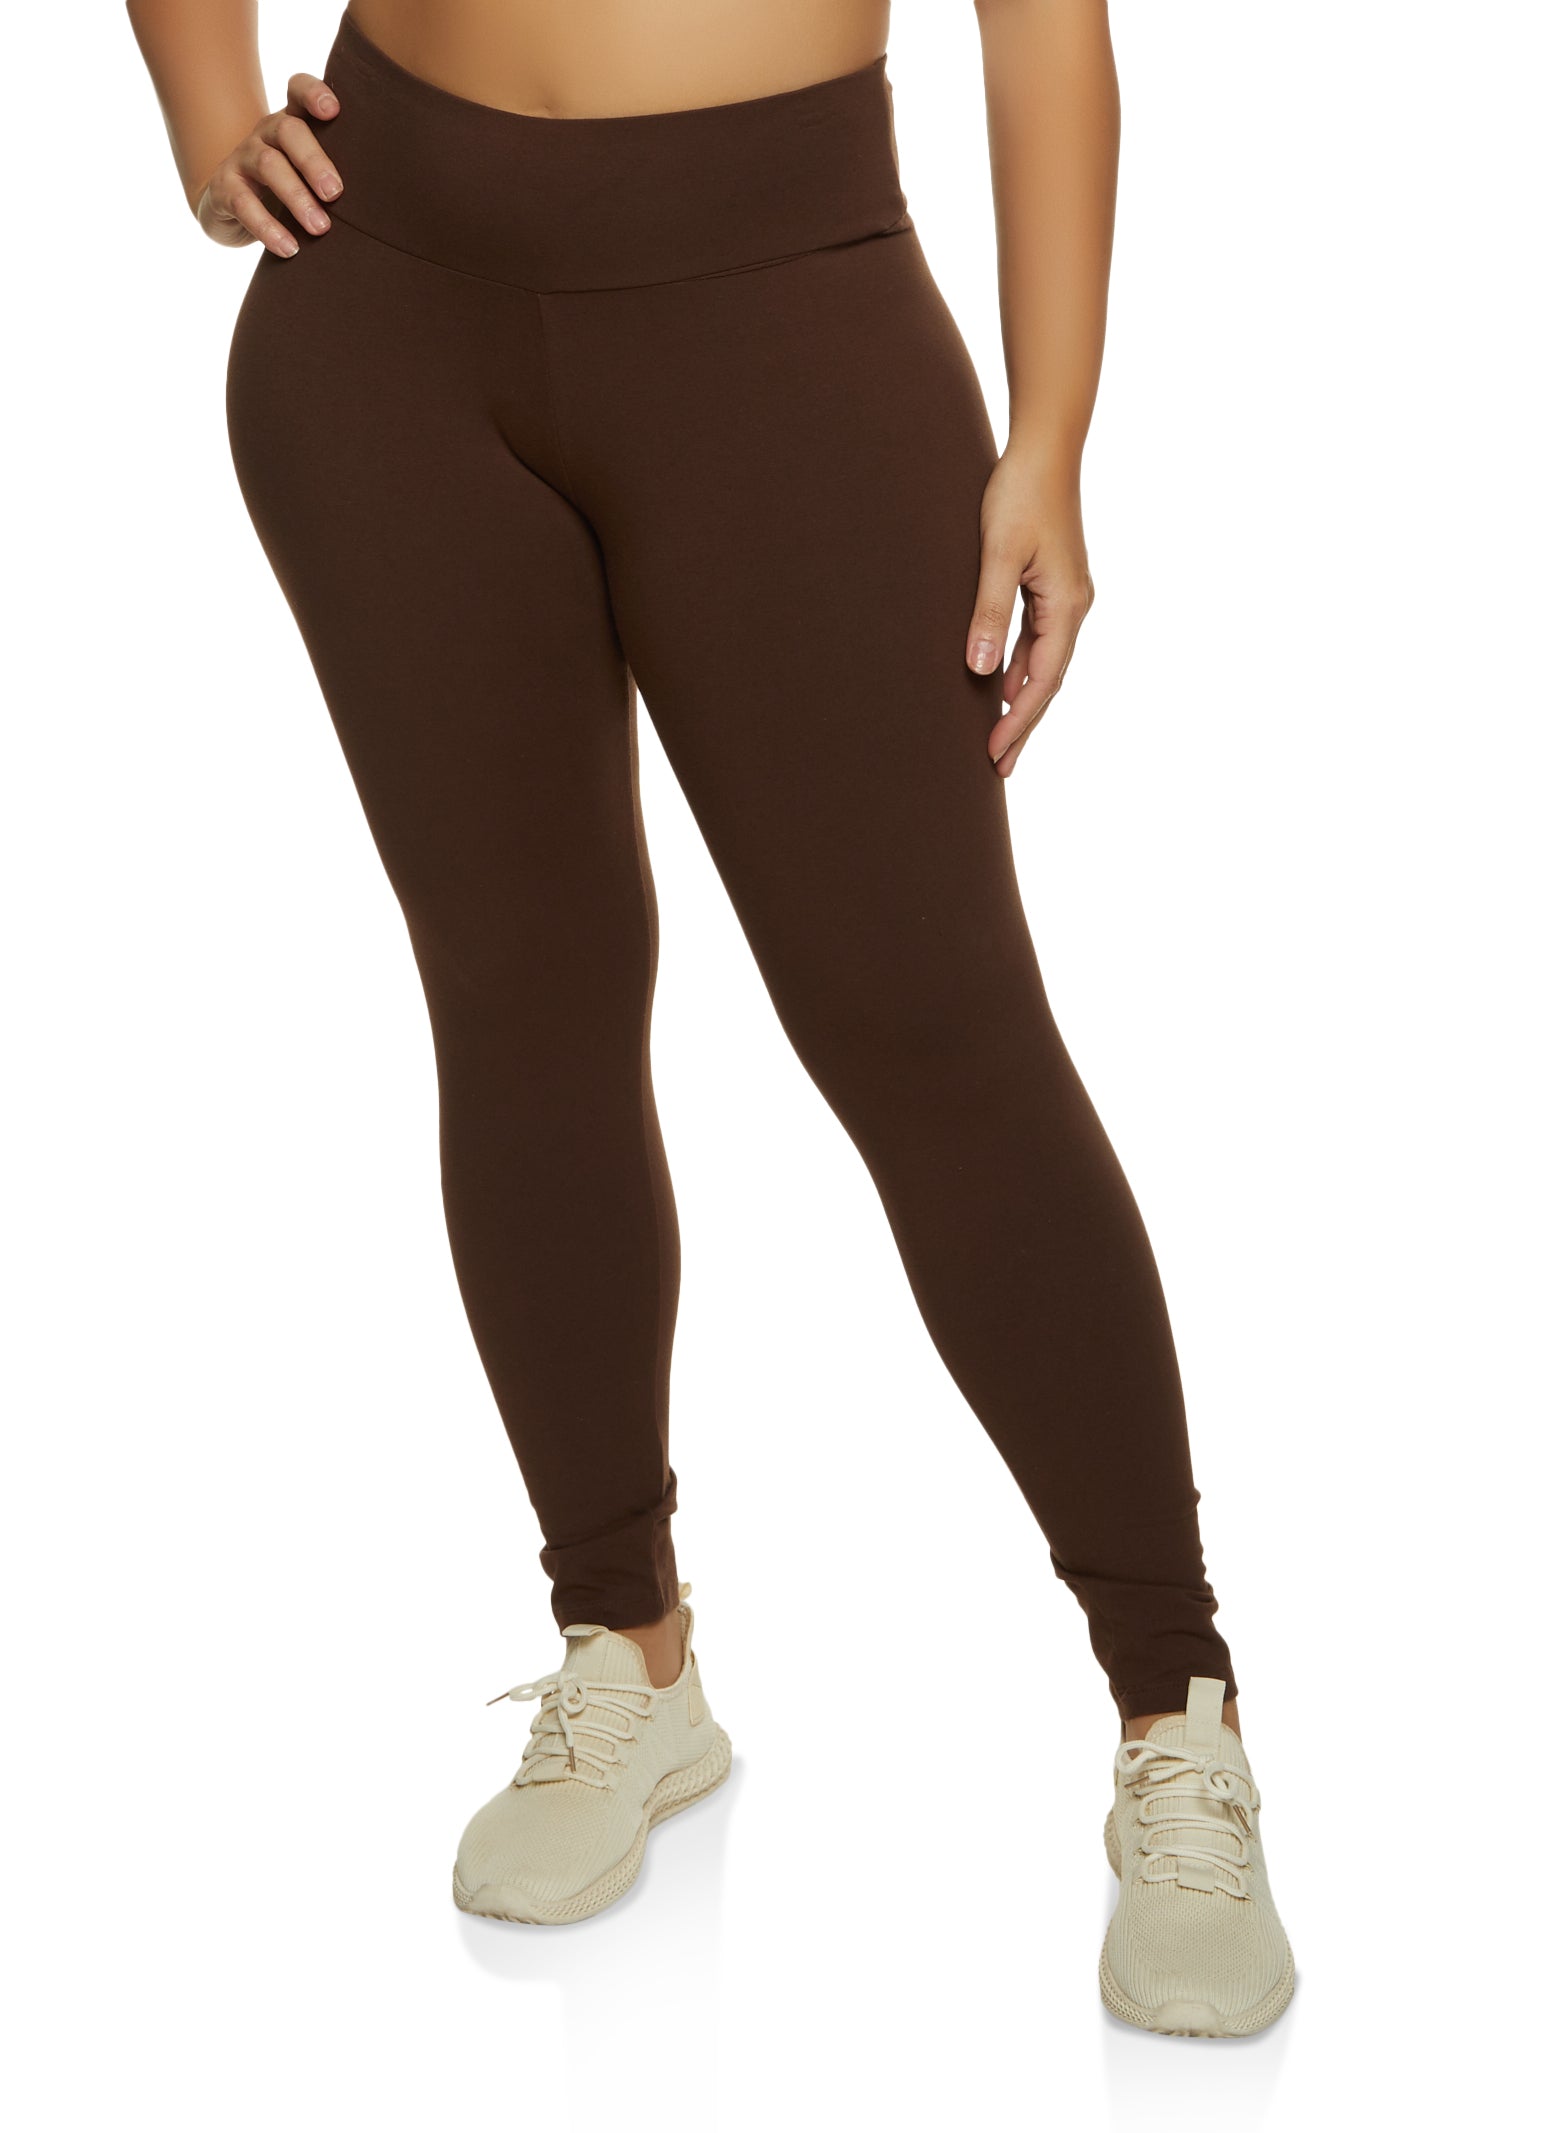 These New Mix plus size summer-weight leggings are seamless, chic